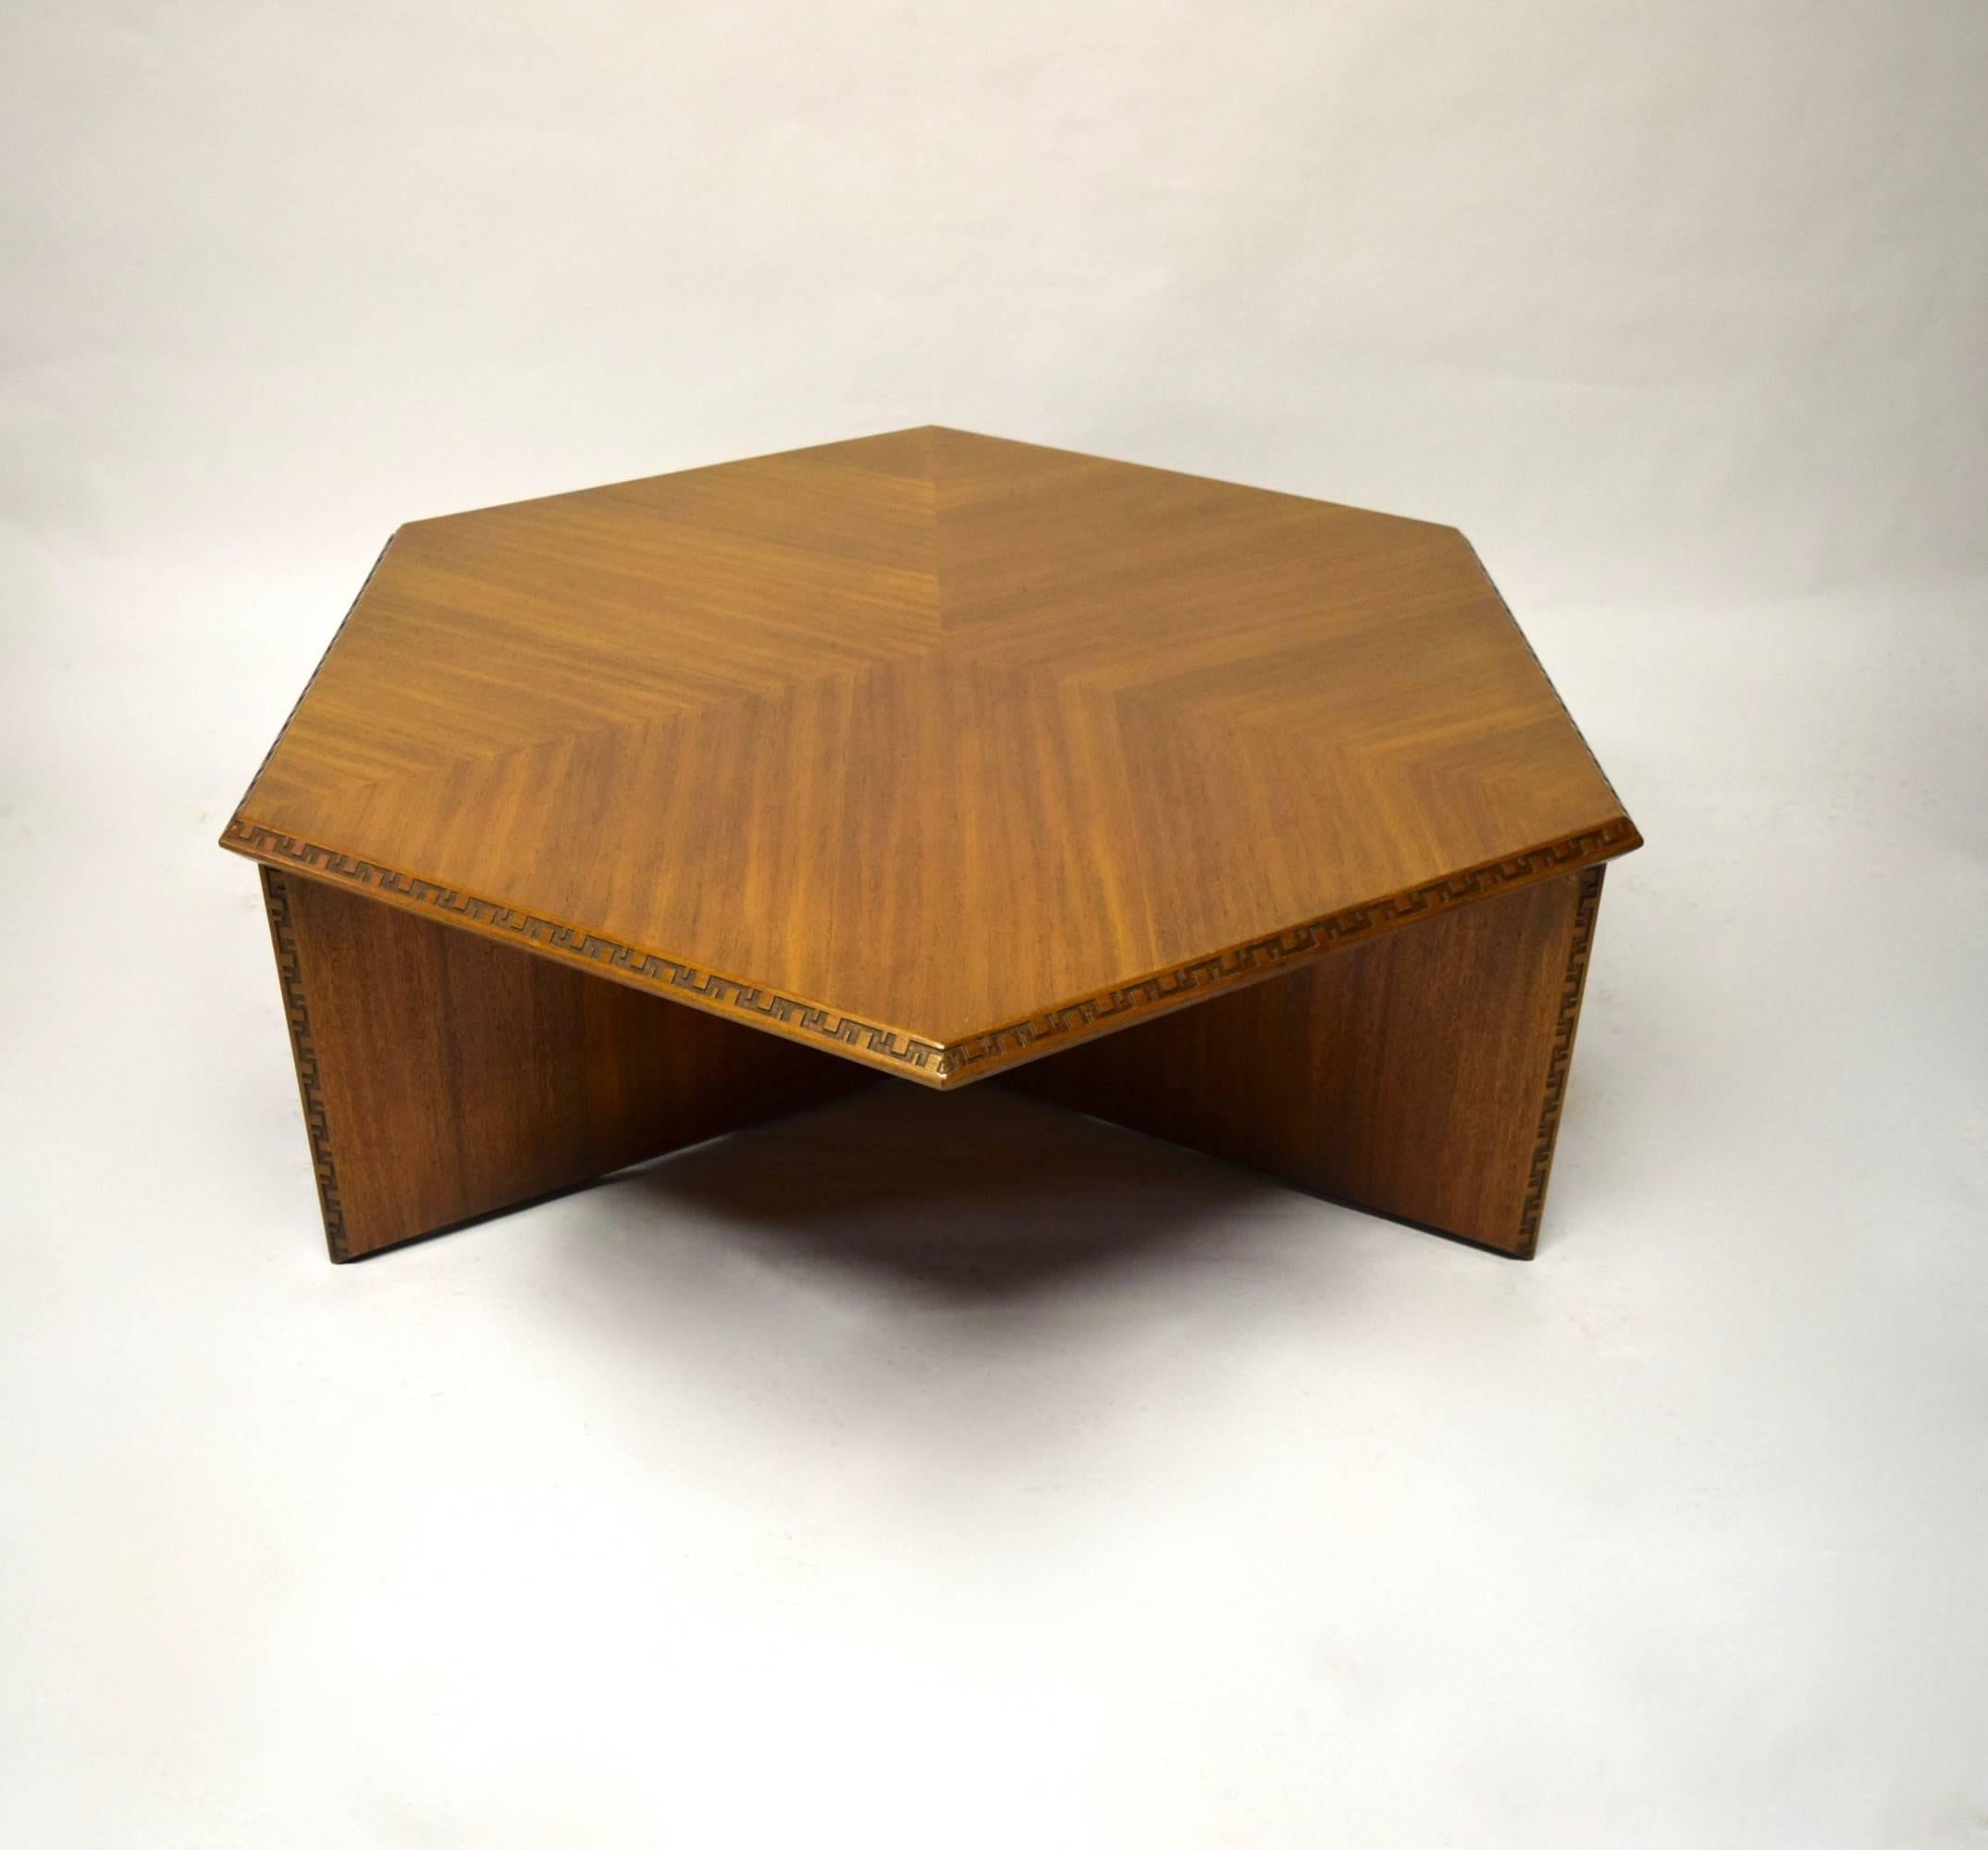 Frank Lloyd Wright six-sided coffee table, 453-3, ion mahogany. The tabletop is six sided with the grain running in four directions. The base has three legs that meet in the center from every other corner. All edges have a Taliesin detail.
Three